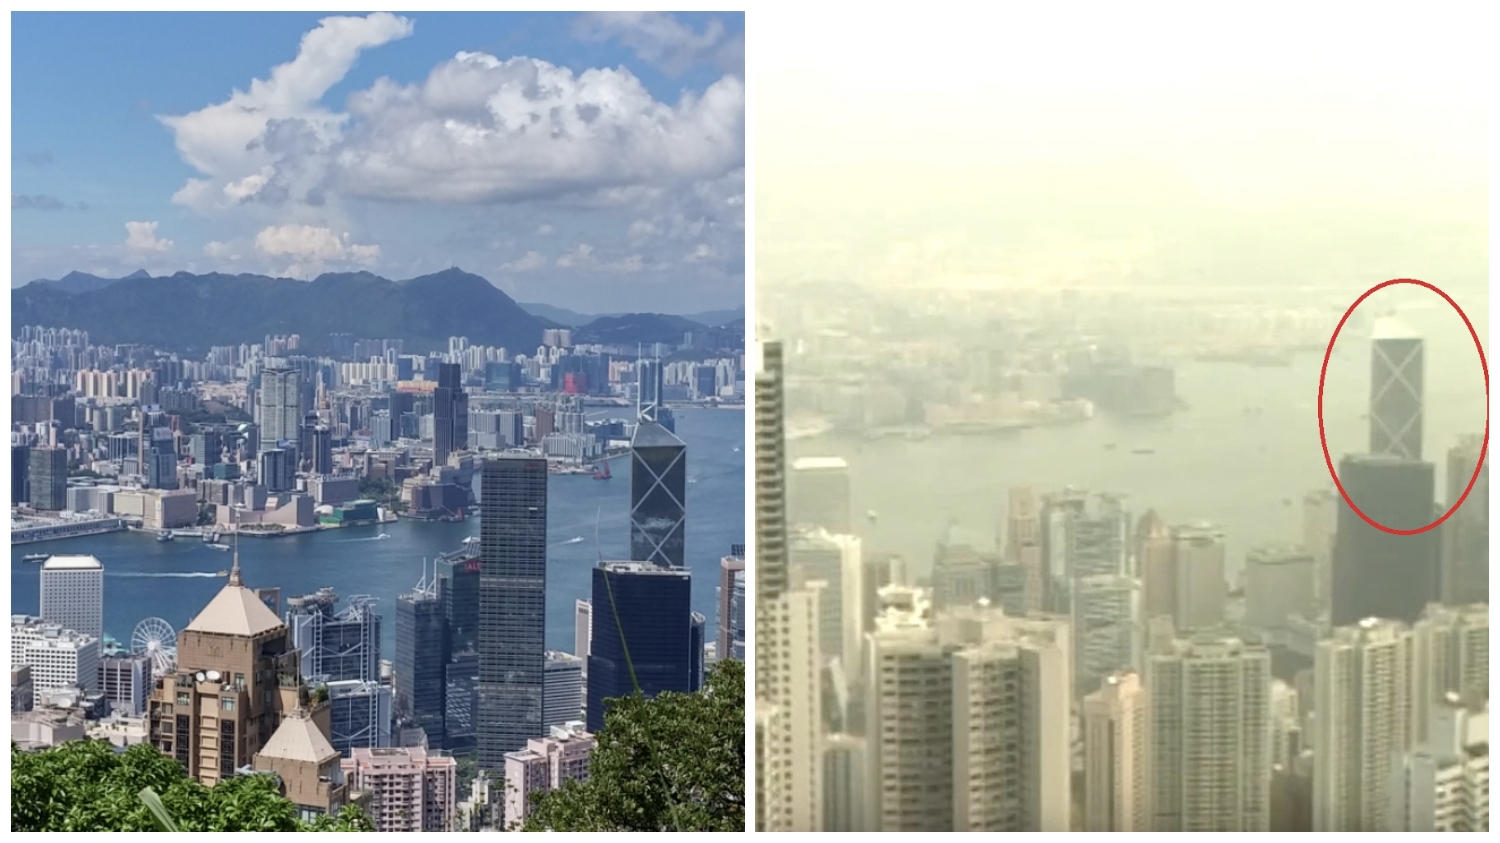 Screenshots of soap opera show the view at Hong Kong Victoria Peak in the mid-1990s